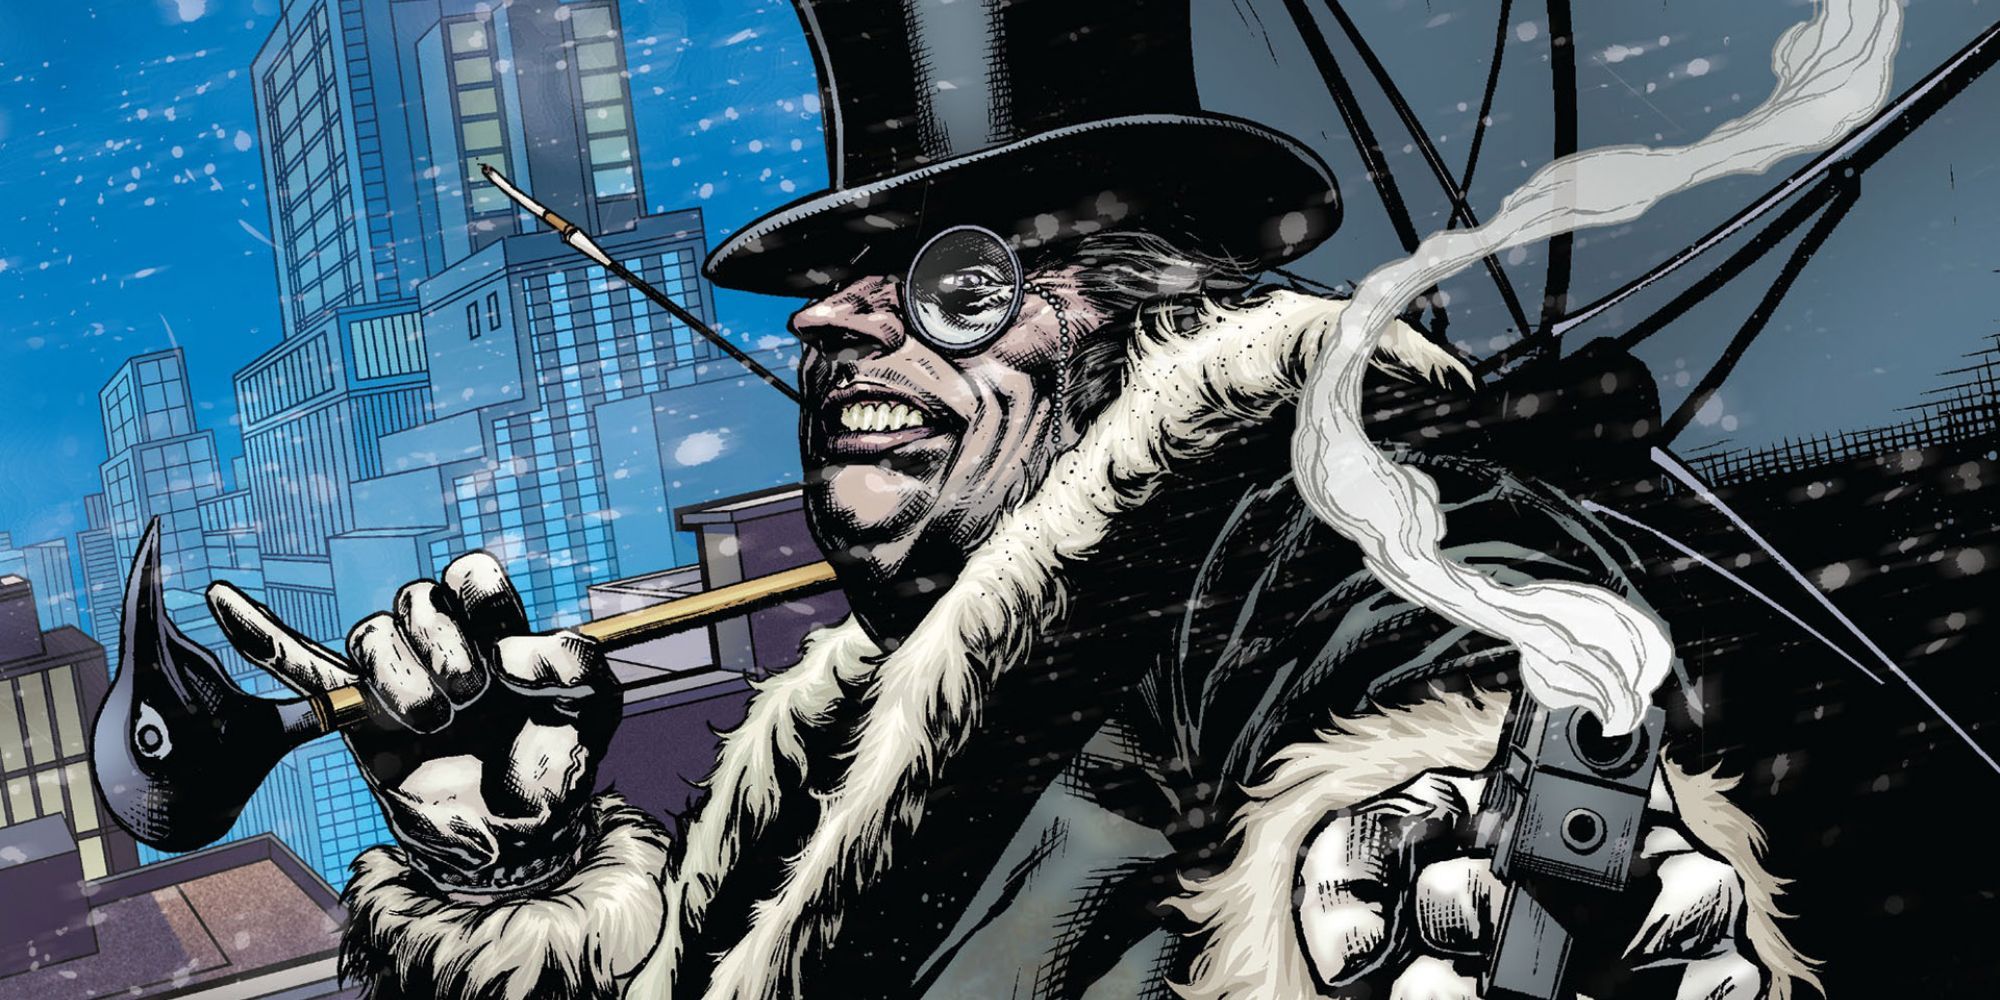 The Penguin sneering and holding a smoking gun in Batman 23.3